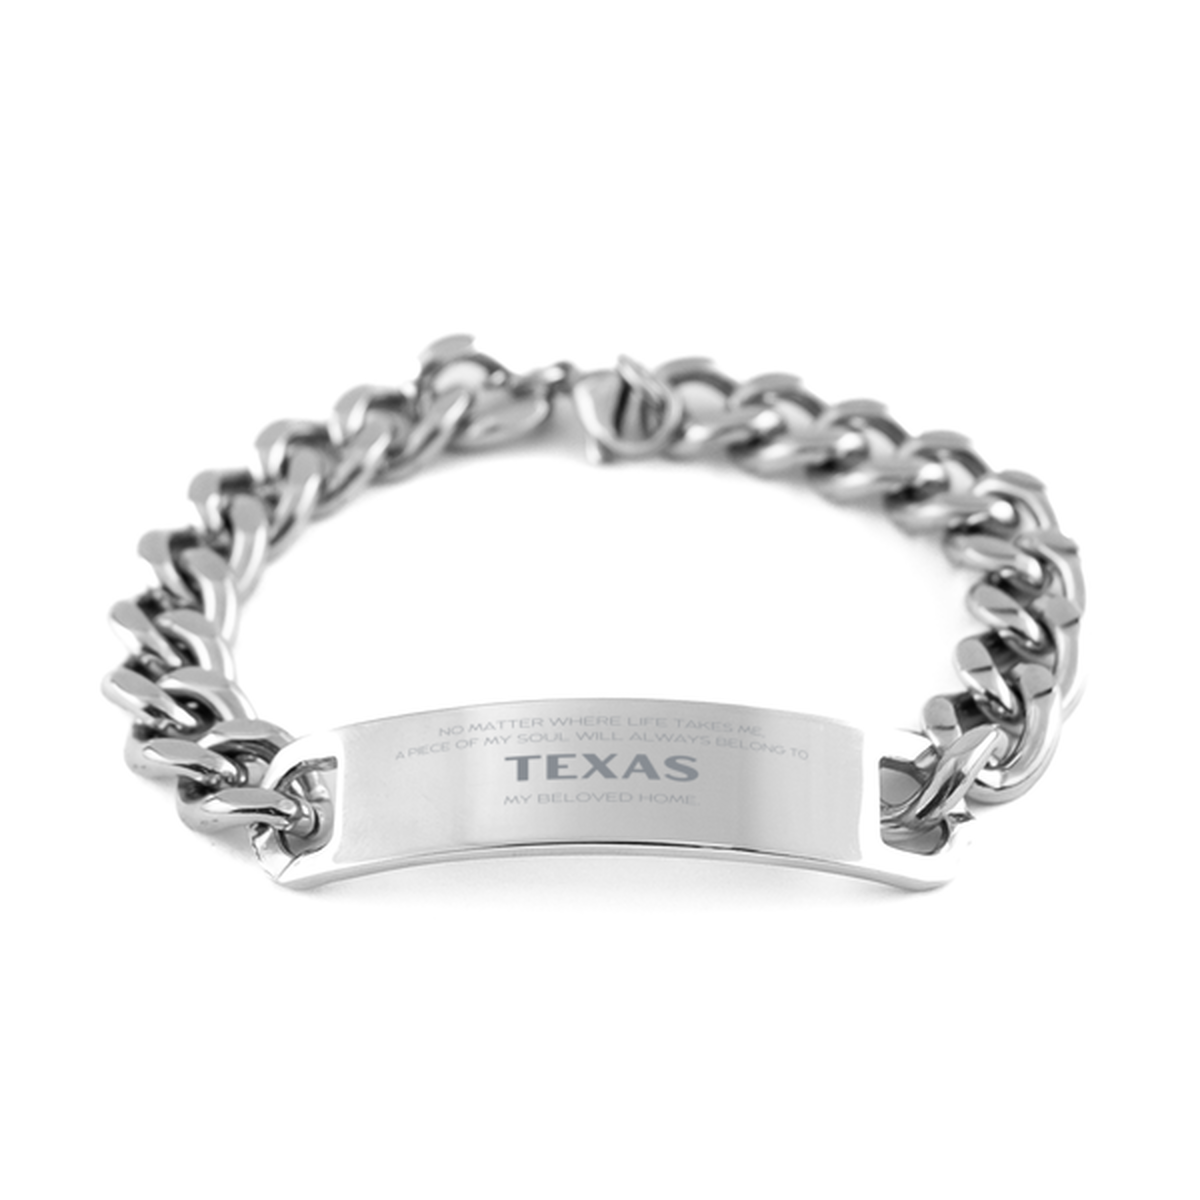 Love Texas State Gifts, My soul will always belong to Texas, Proud Cuban Chain Stainless Steel Bracelet, Birthday Unique Gifts For Texas Men, Women, Friends